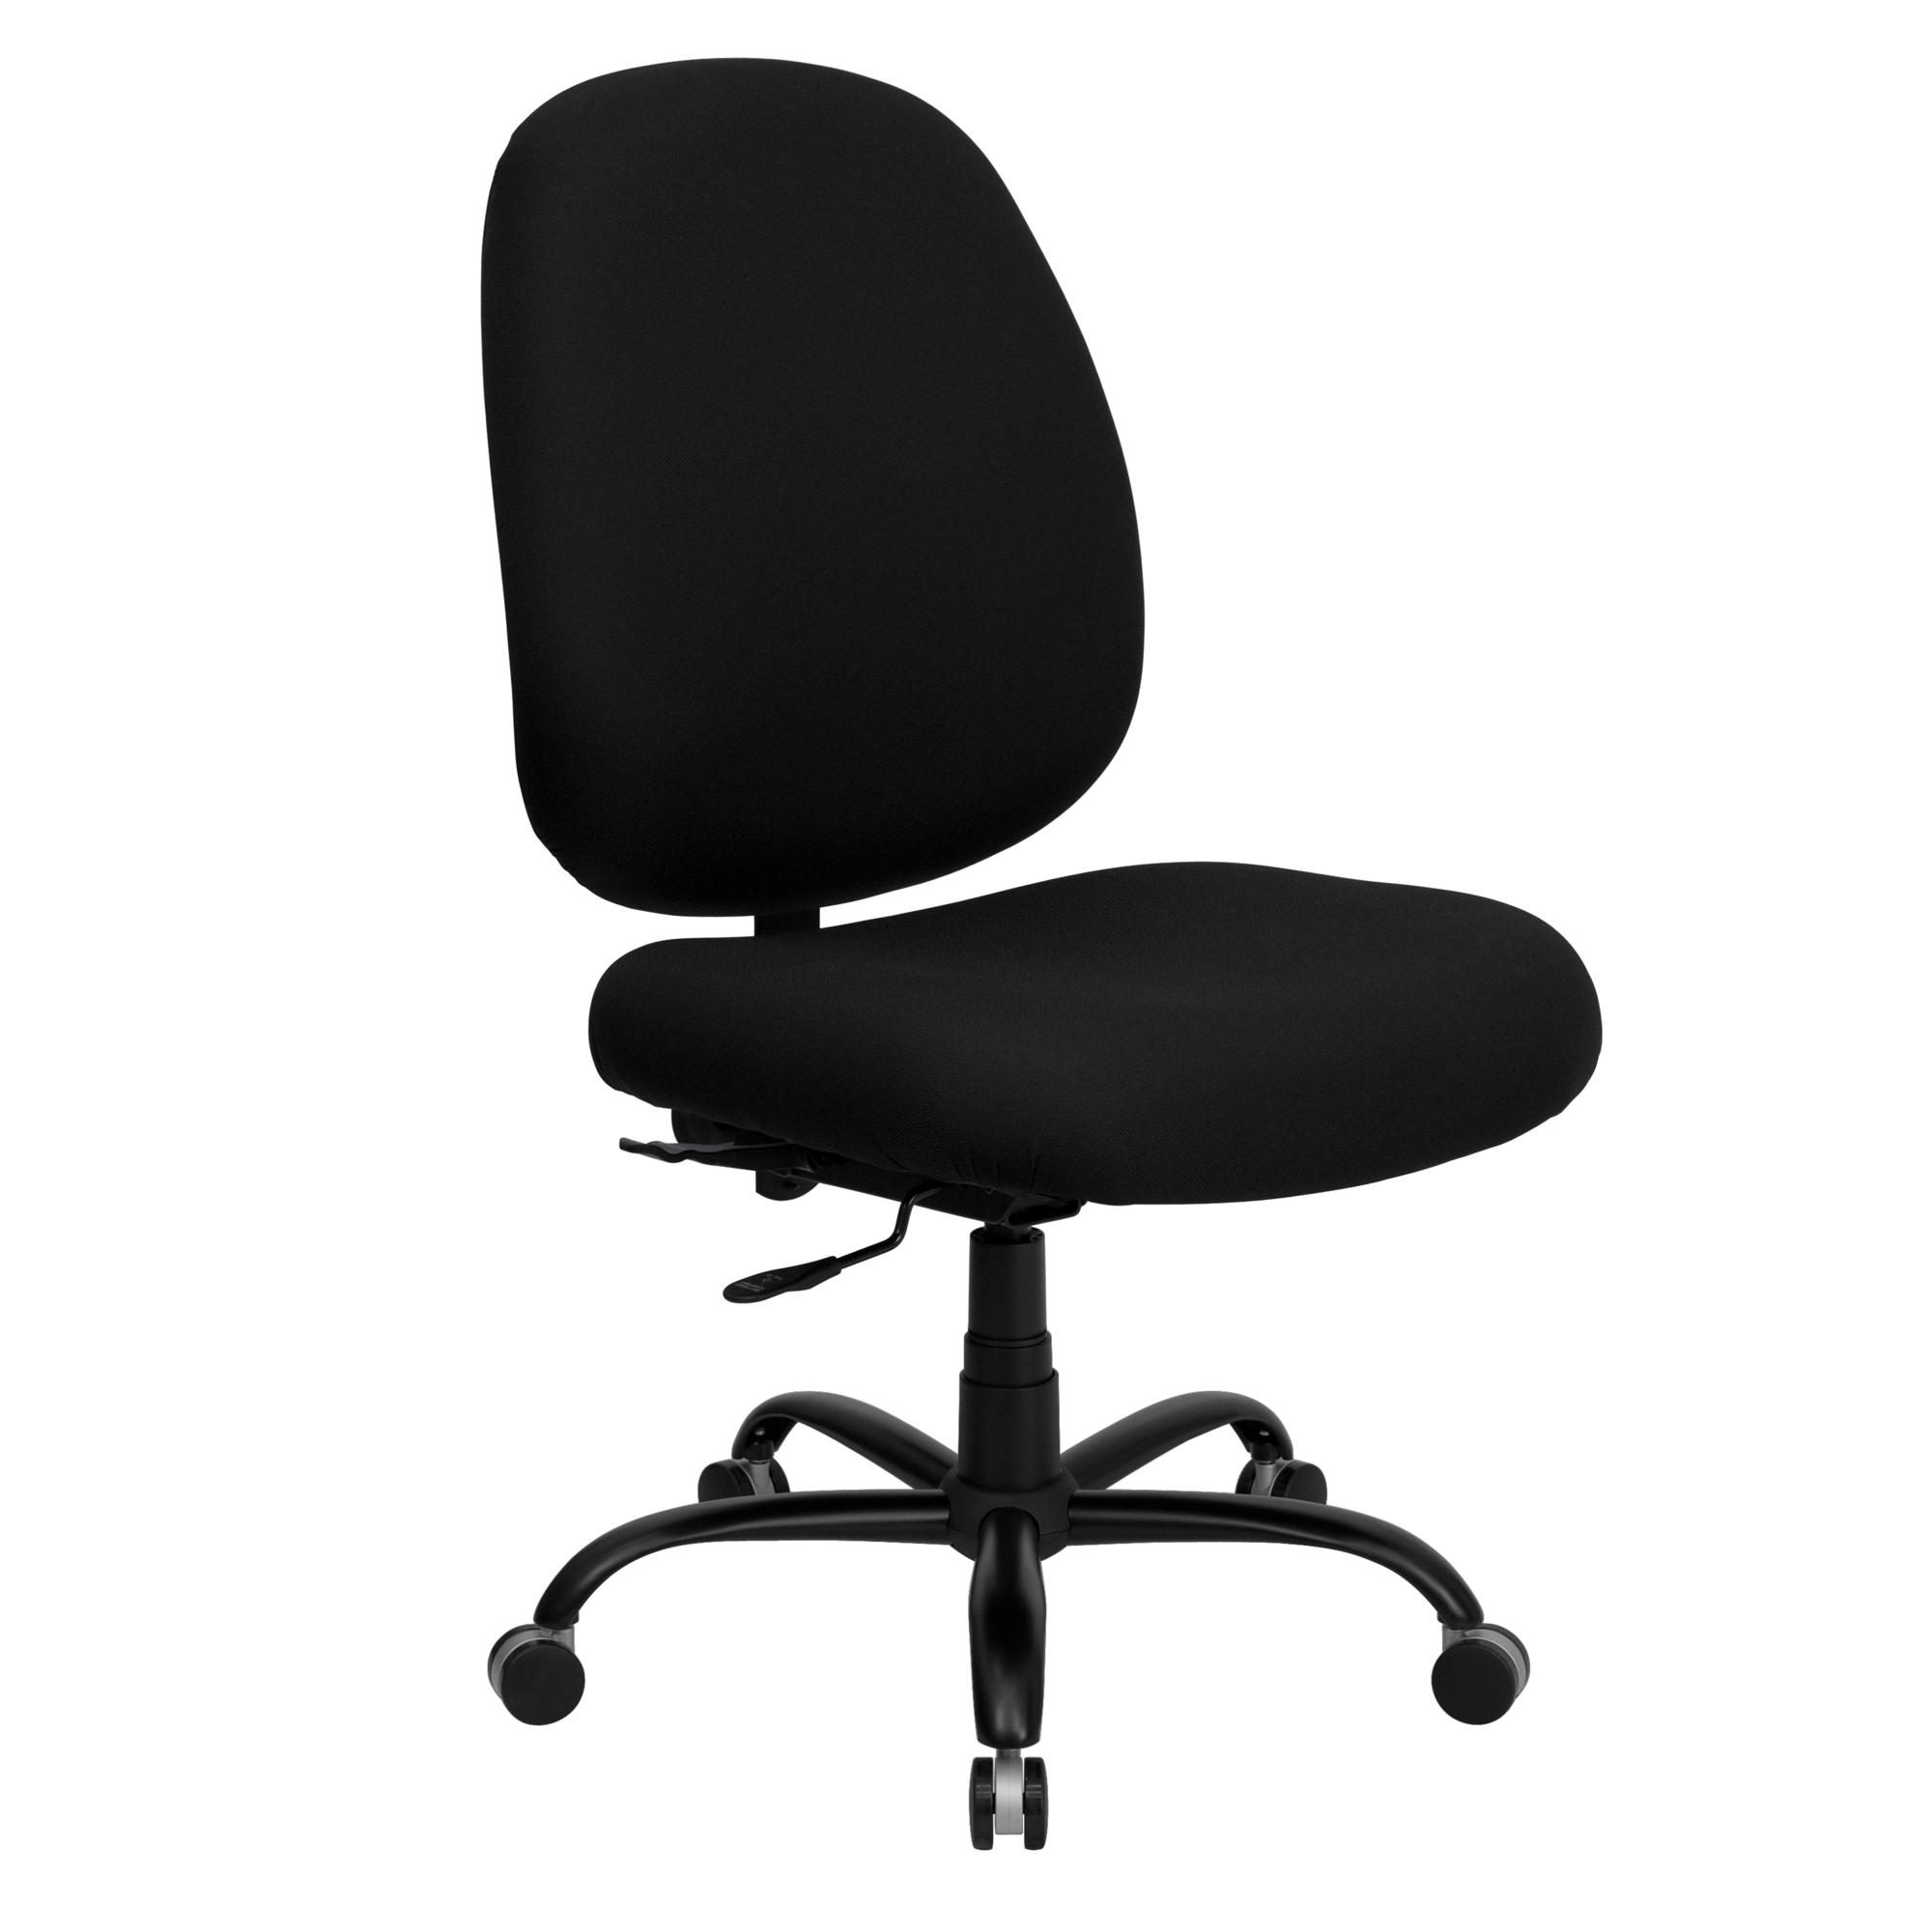 Flash Furniture, 400 lb. Rated High Back Black Fabric Office Chair, Primary Color Black, Included (qty.) 1, Model WL715MGBK